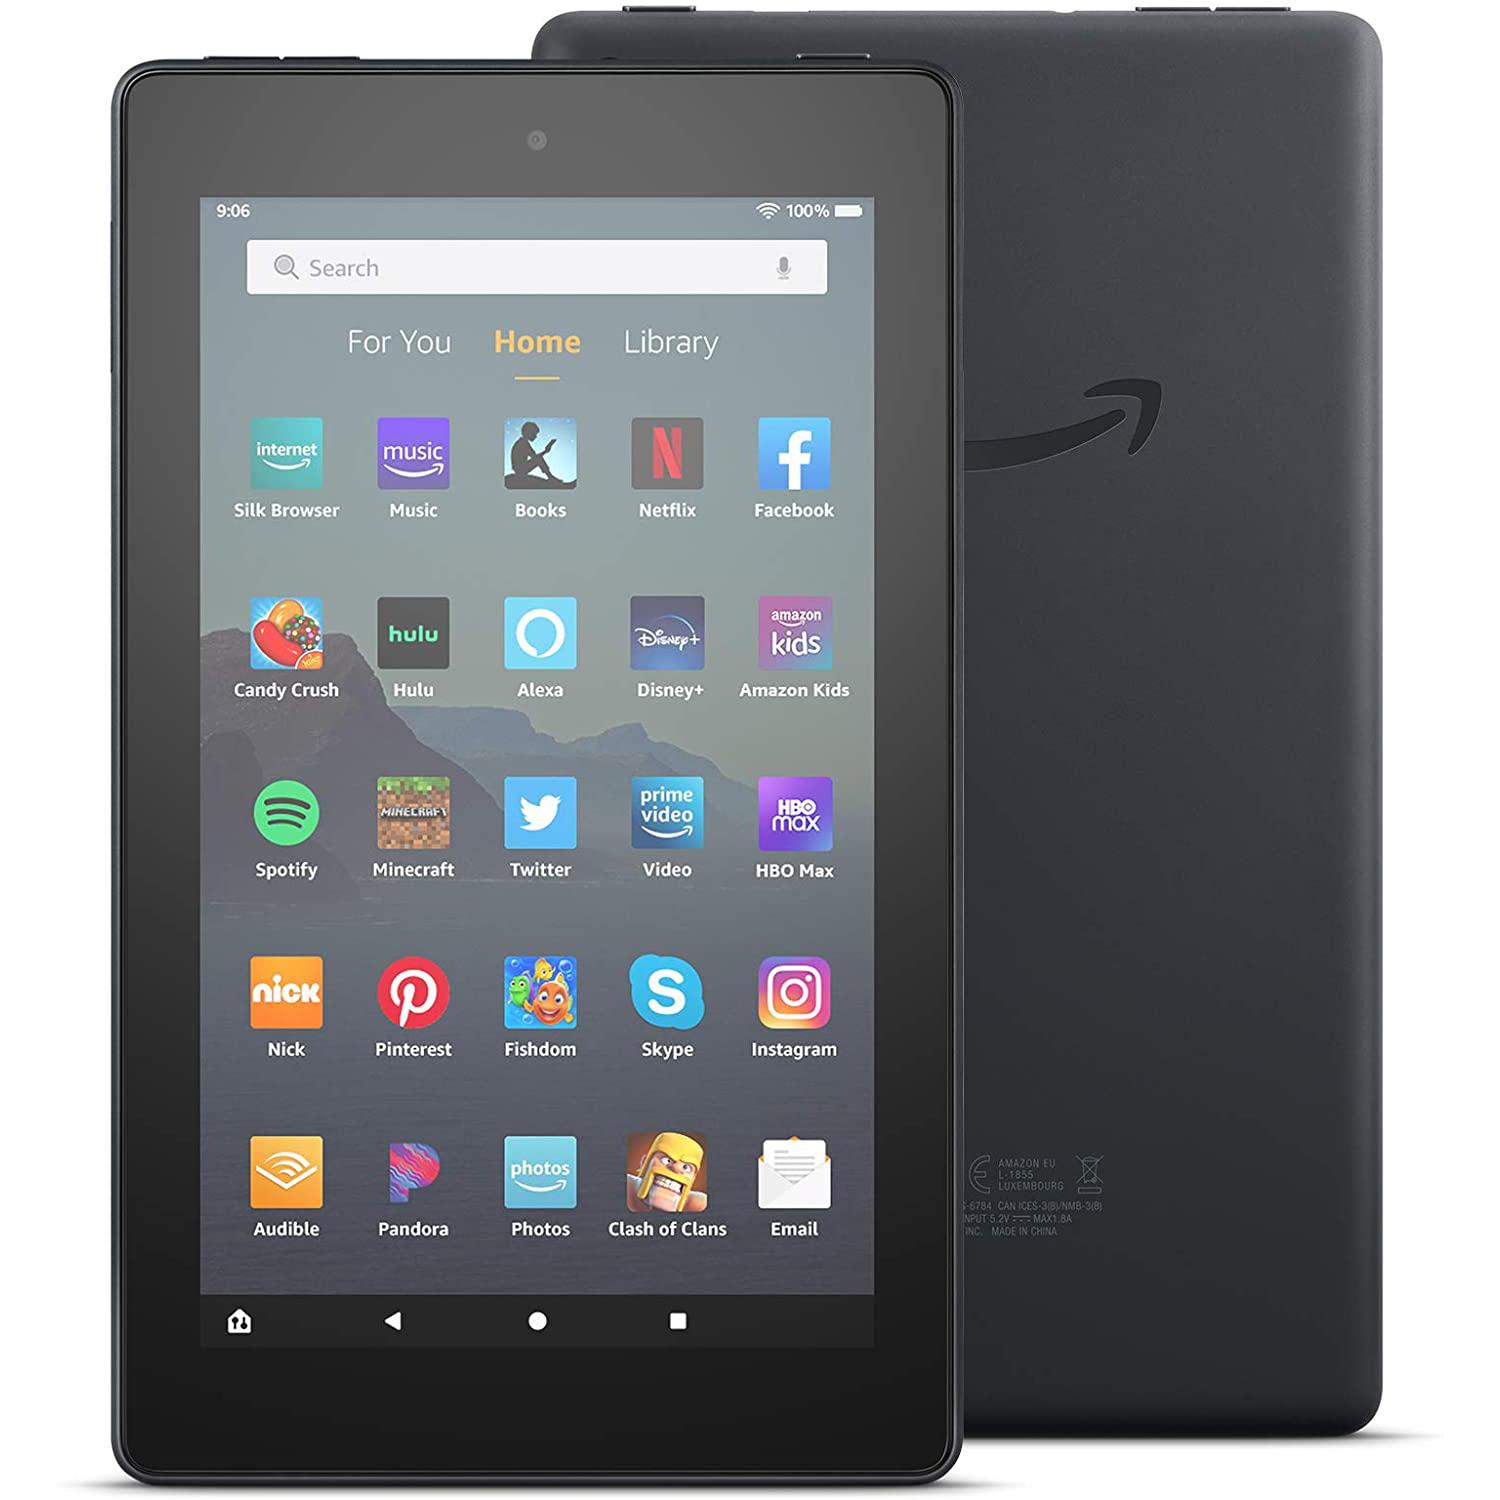 Amazon Fire 7 16GB Tablet for $39.99 Shipped